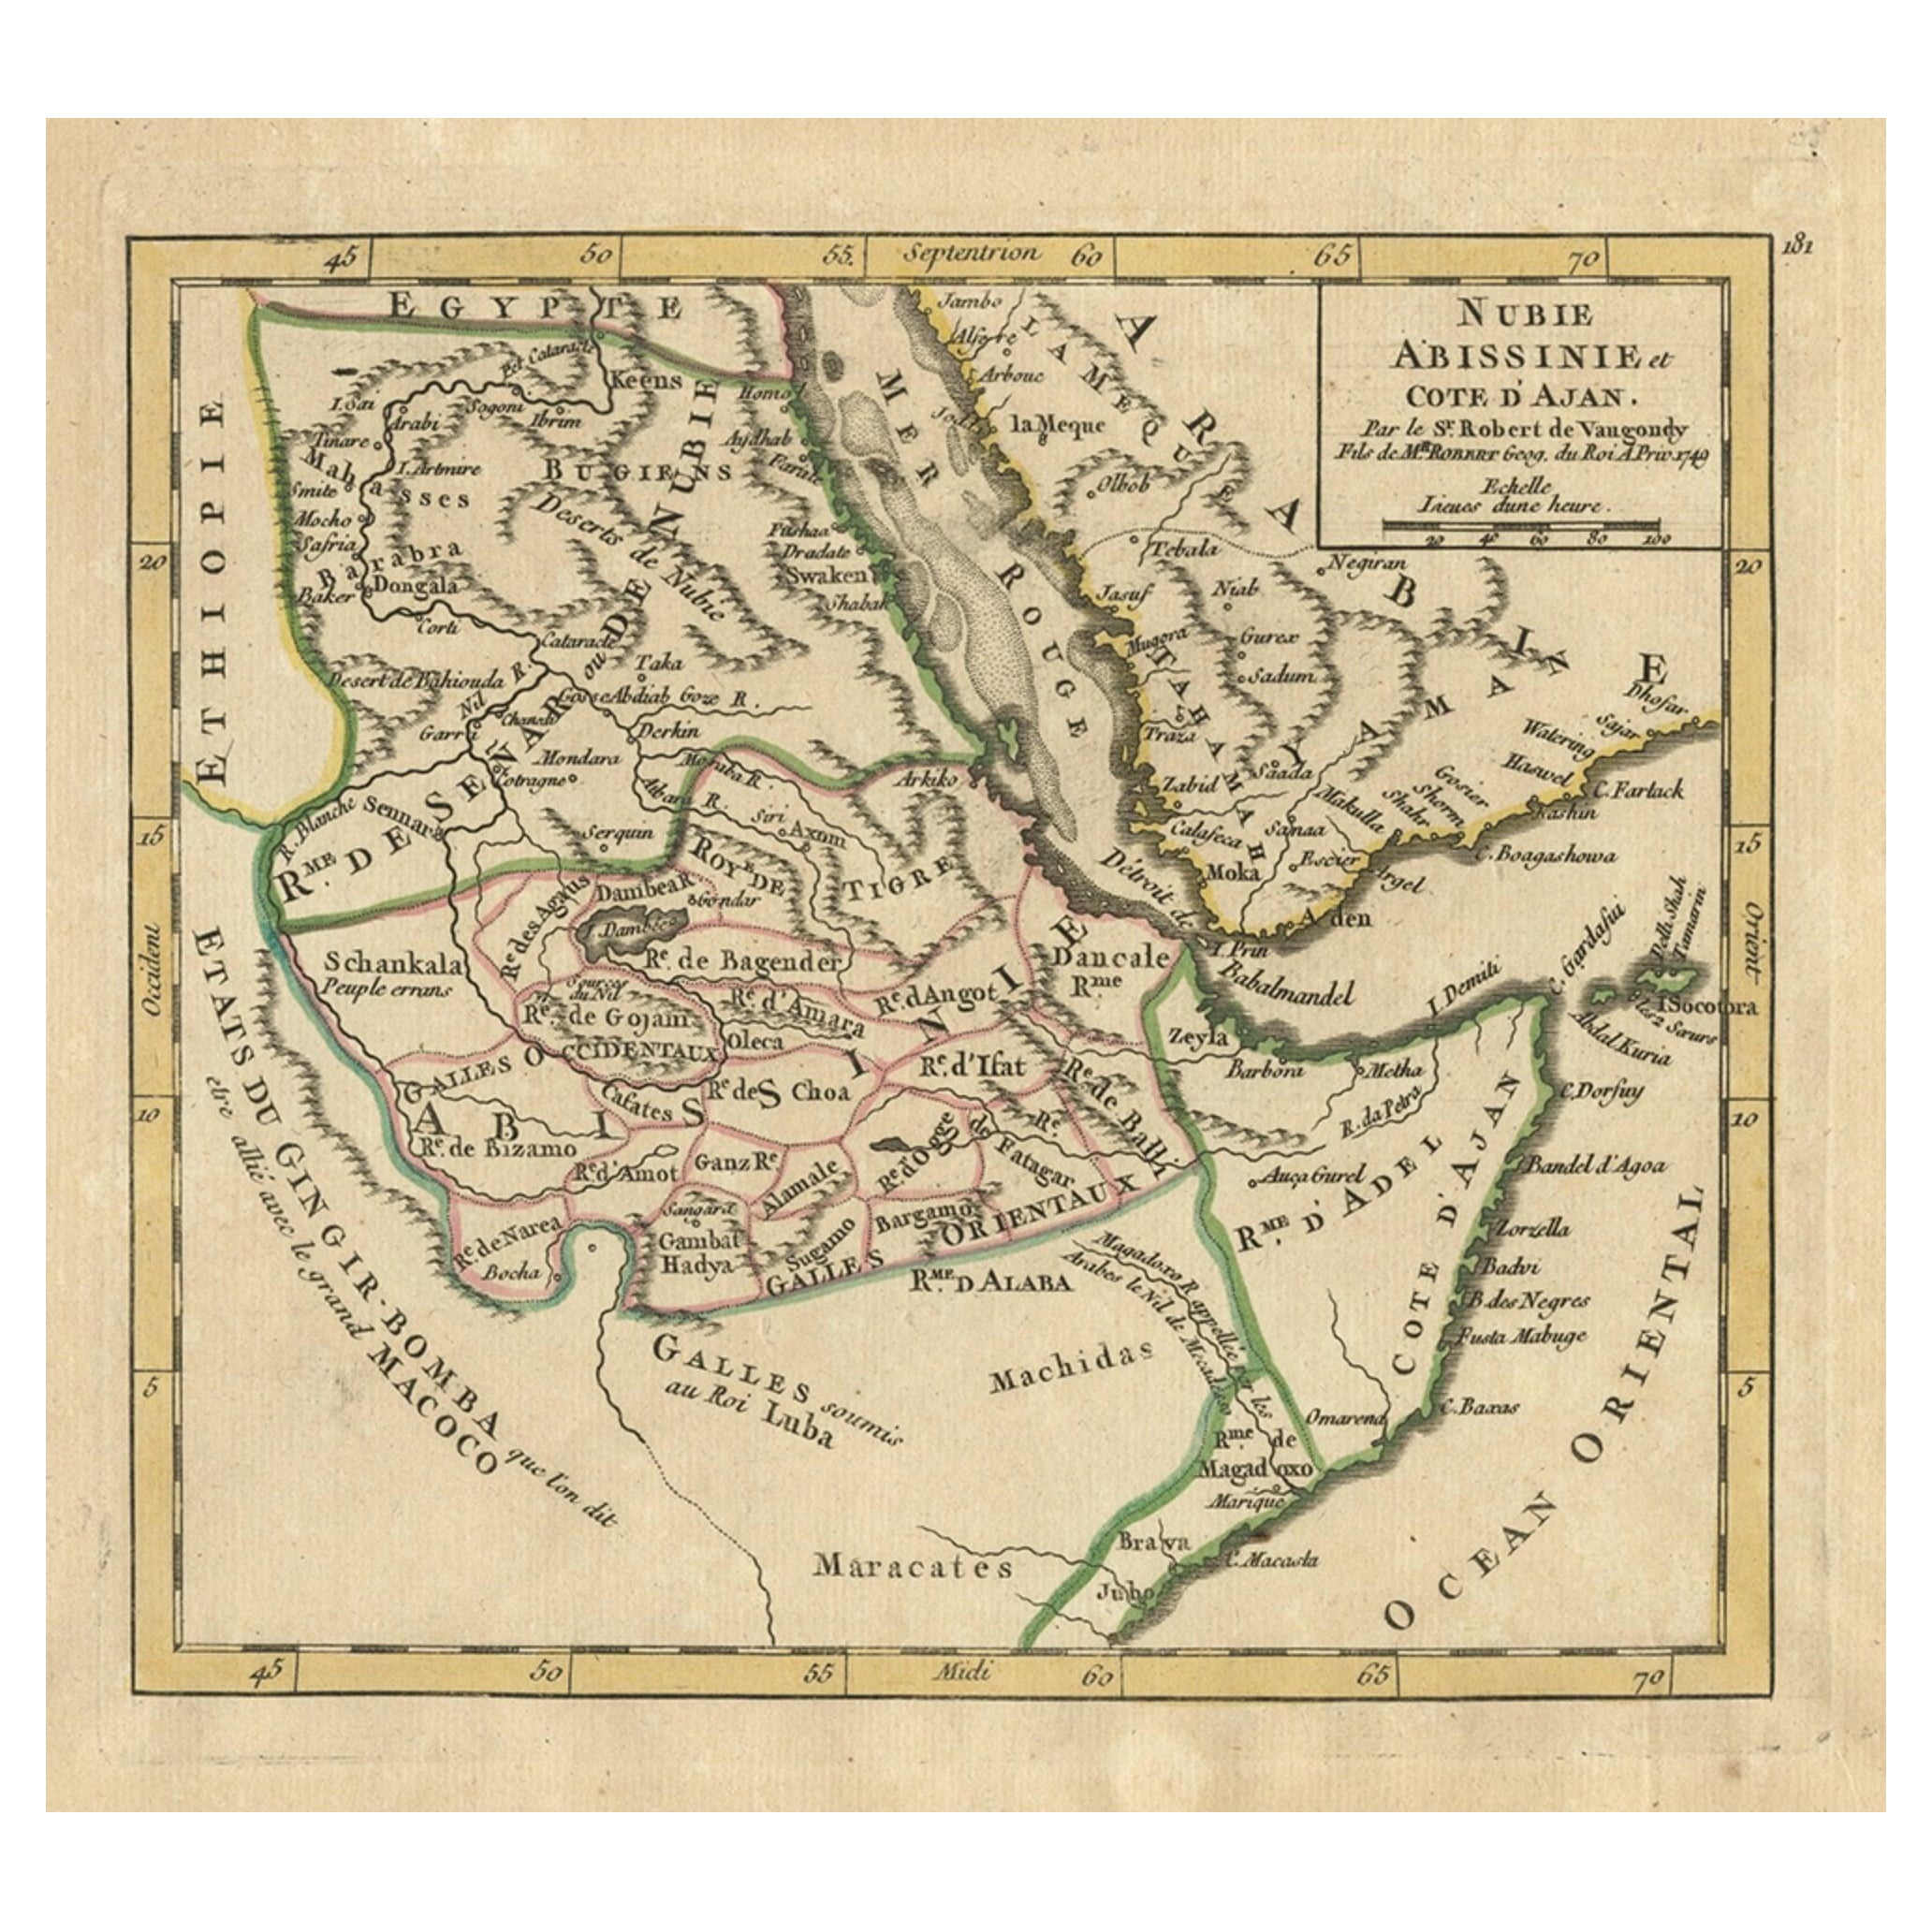 Antique Map of Abyssinia, Sudan and the Red Sea by Vaugondy, 1750